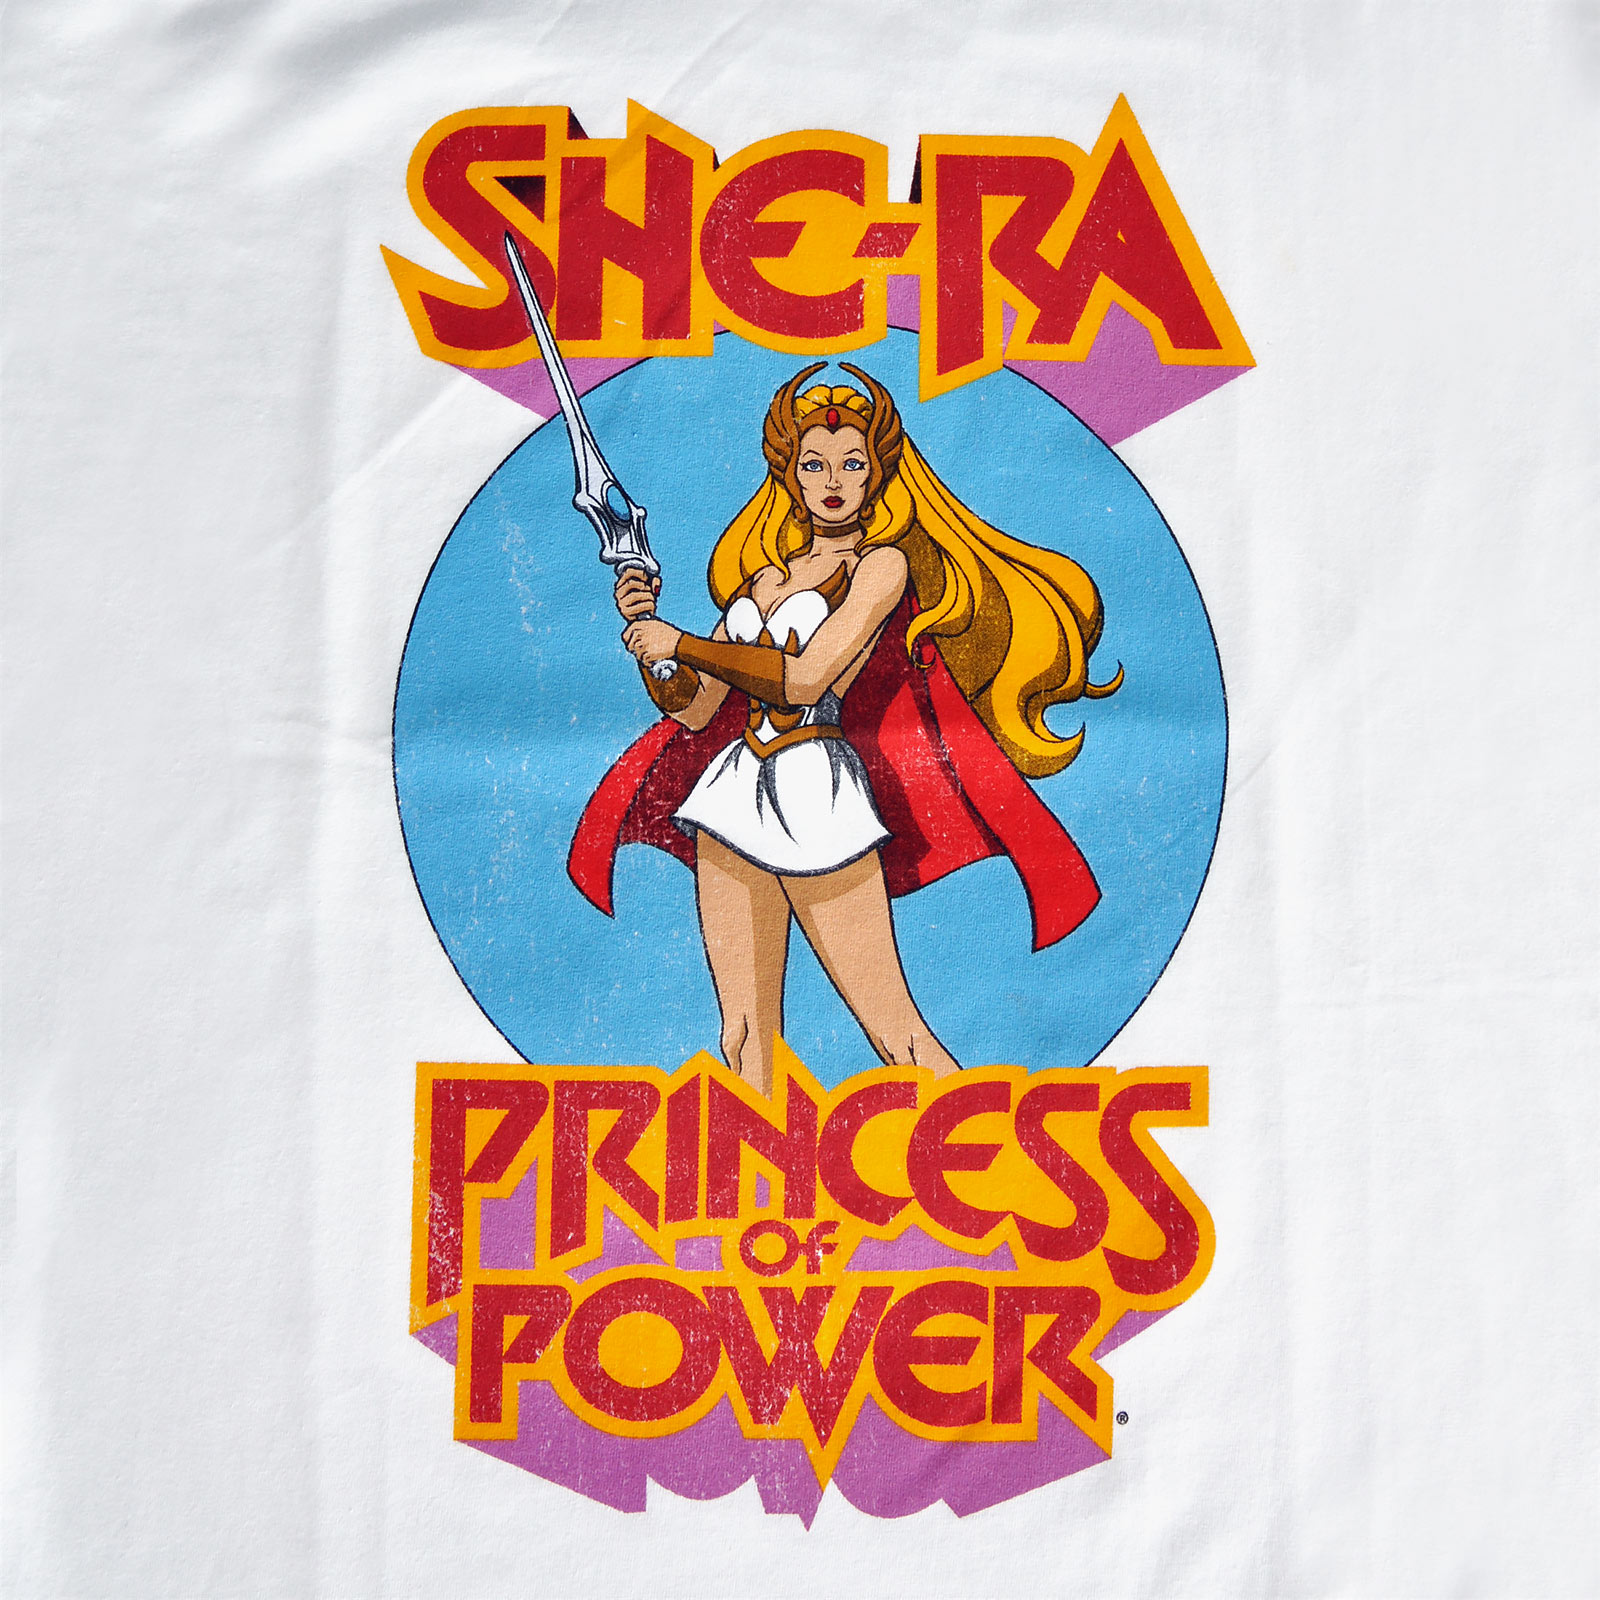 Masters of the Universe - She-Ra Princess of Power Dames T-shirt Wit